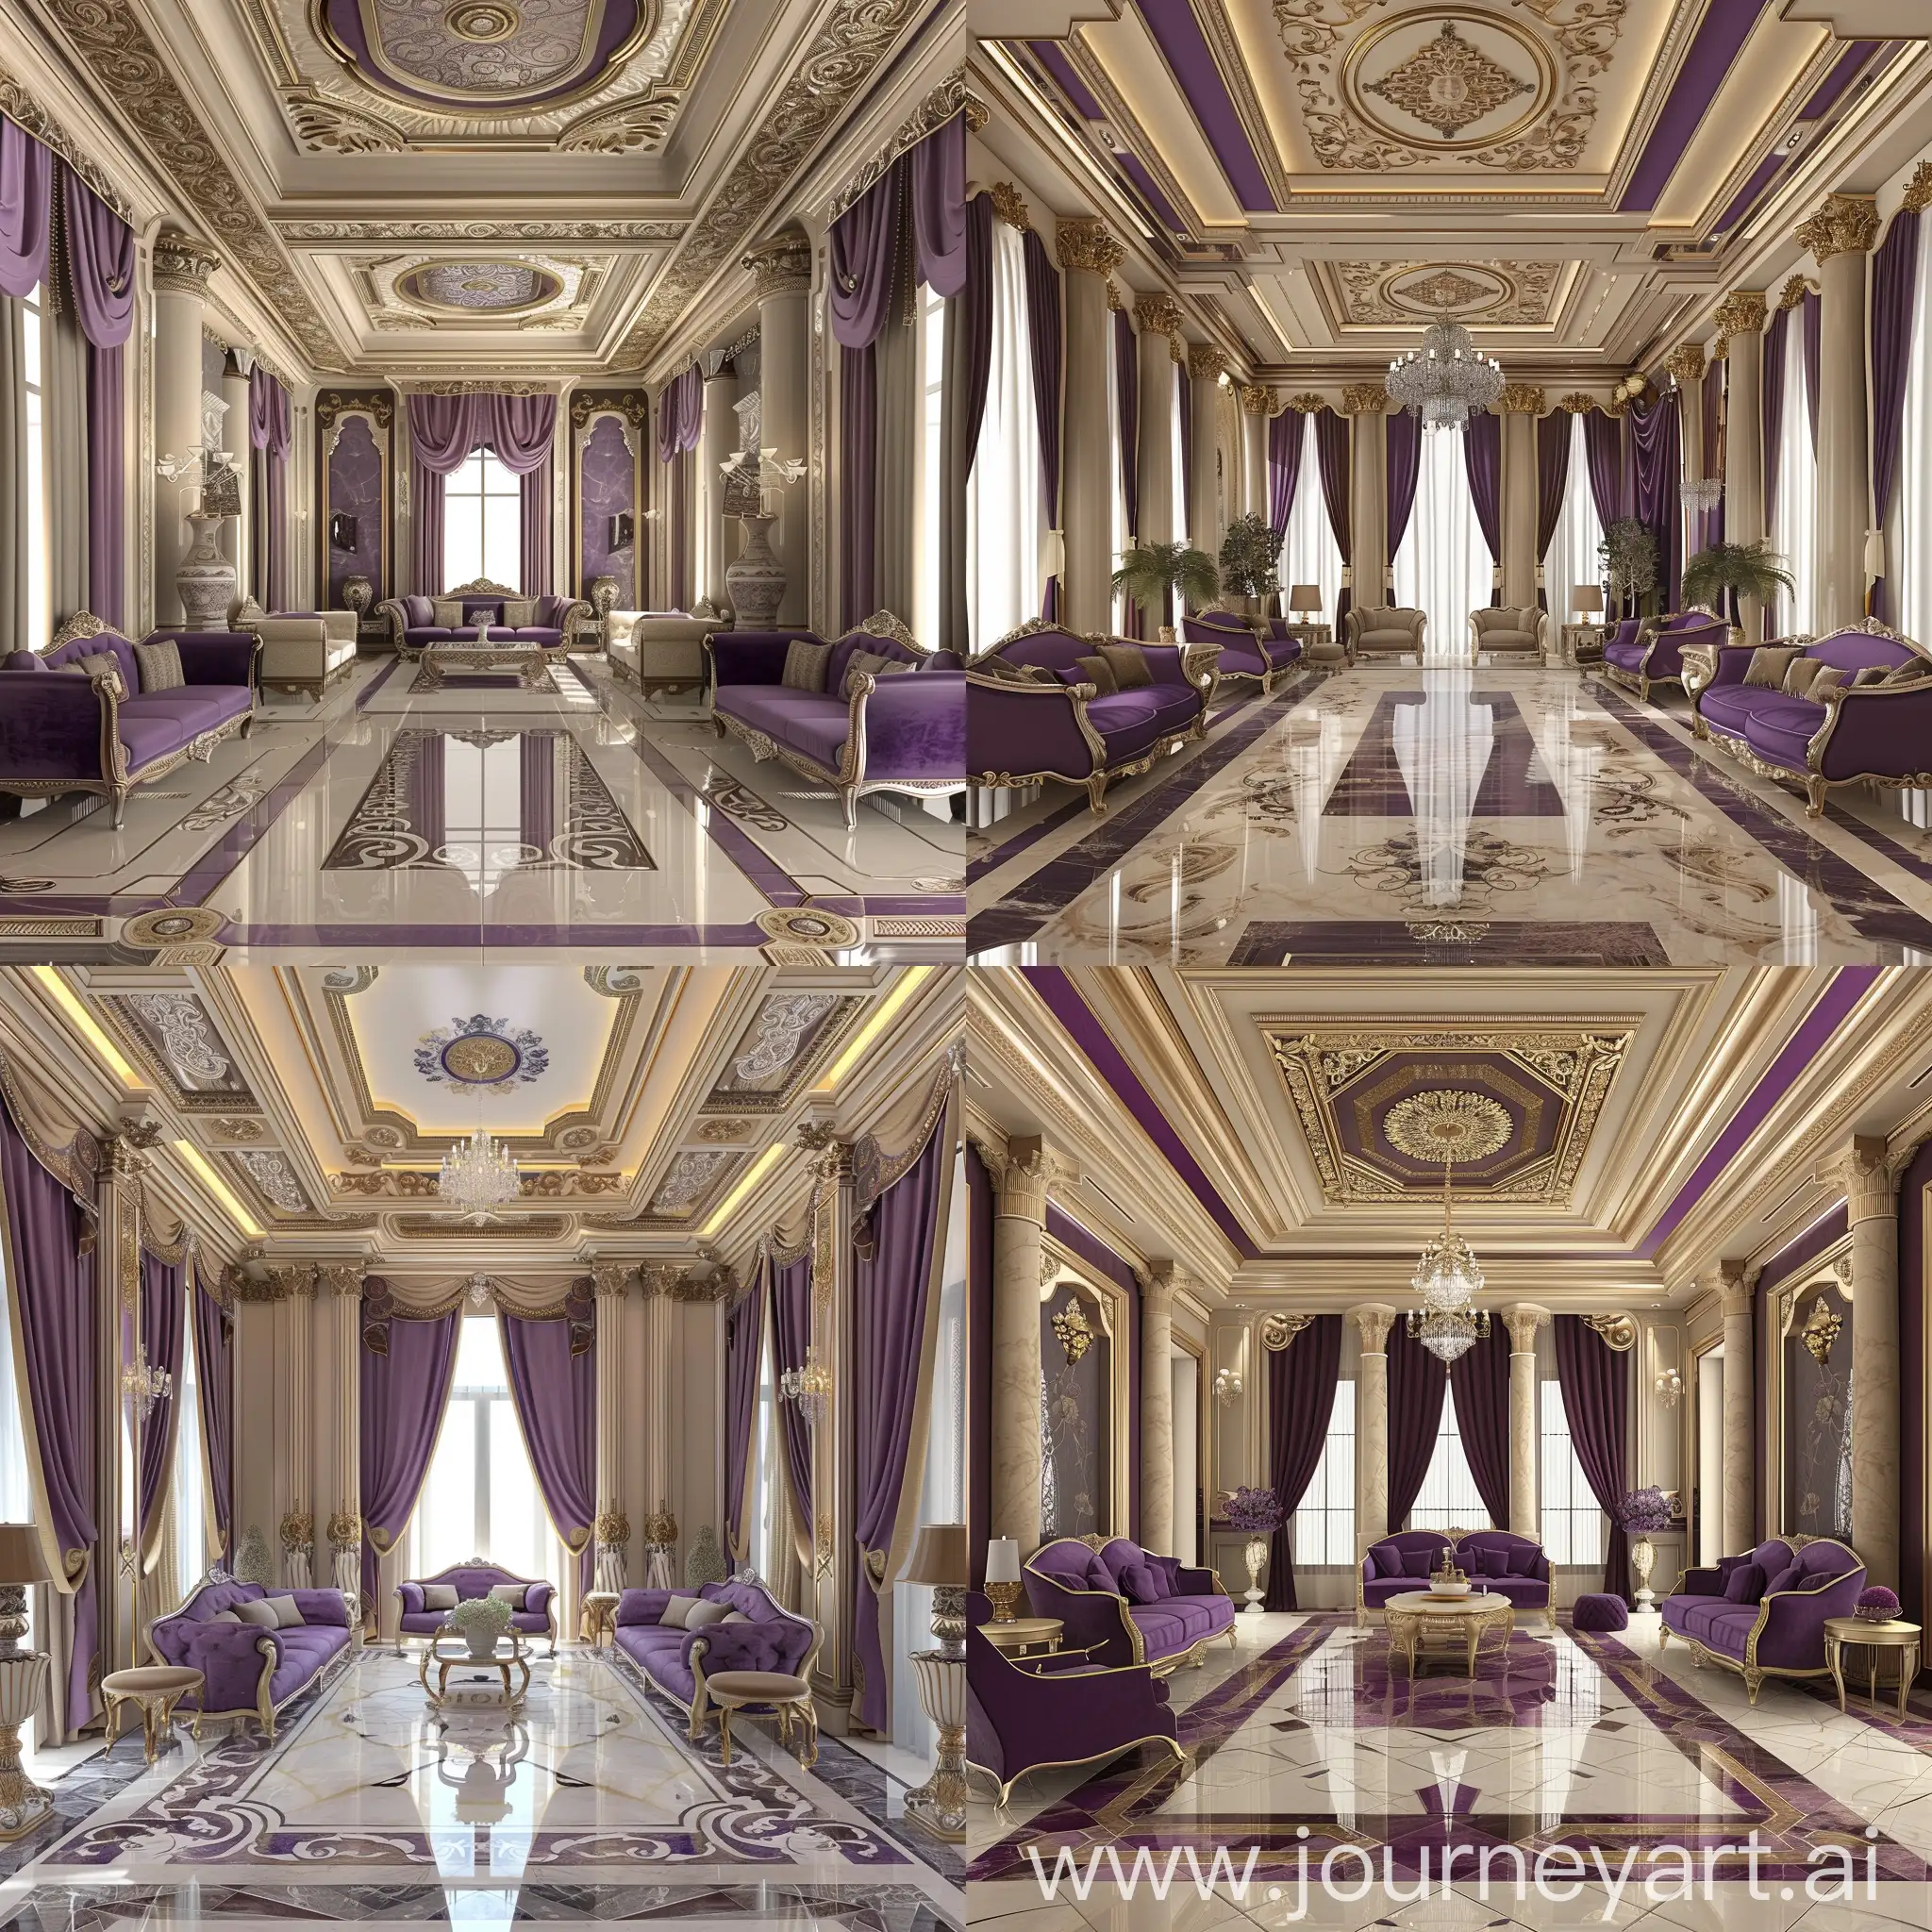 ladies majlis  design. Seven meters long. Five meters wide. Height 4 and a half meters. Classic style. Purple and beige colors. The floor waterjet marble. The ceiling contains classic decorations in beige, gold and dark beige colors. The walls have decorative columns and decorative frames. Sofas and chairs in neo-classical style. There are two luxurious chandeliers. There is only one window. On the window is a curtain
